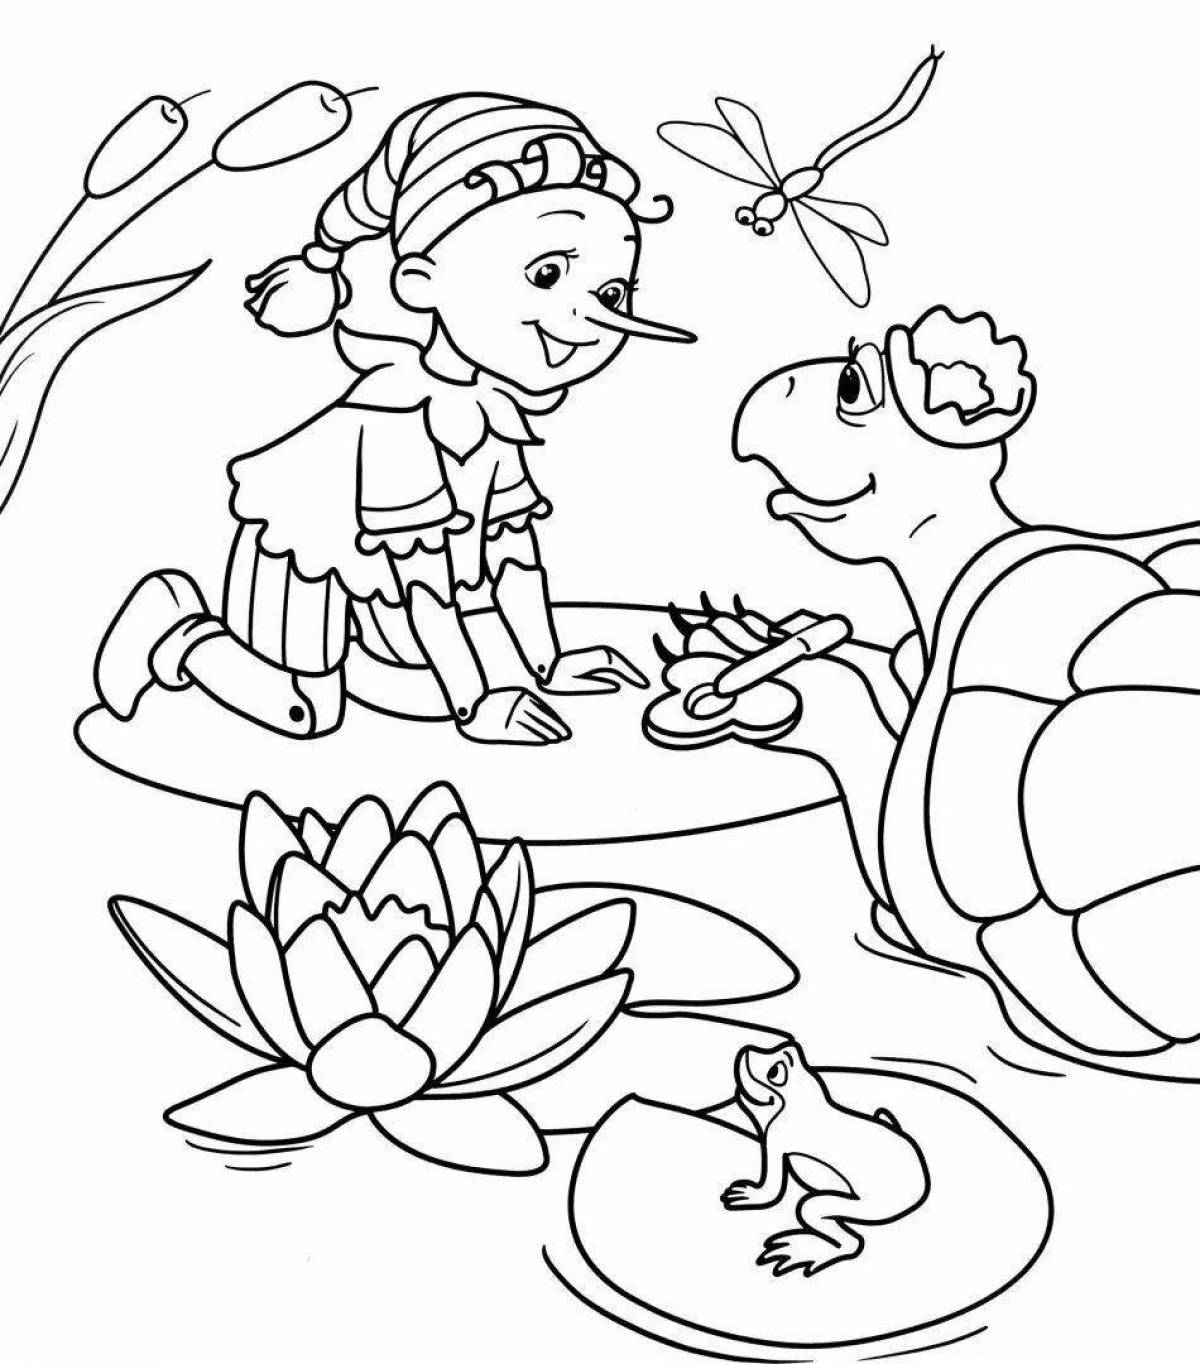 Violent coloring for children 3-4 years old Russian folk tales